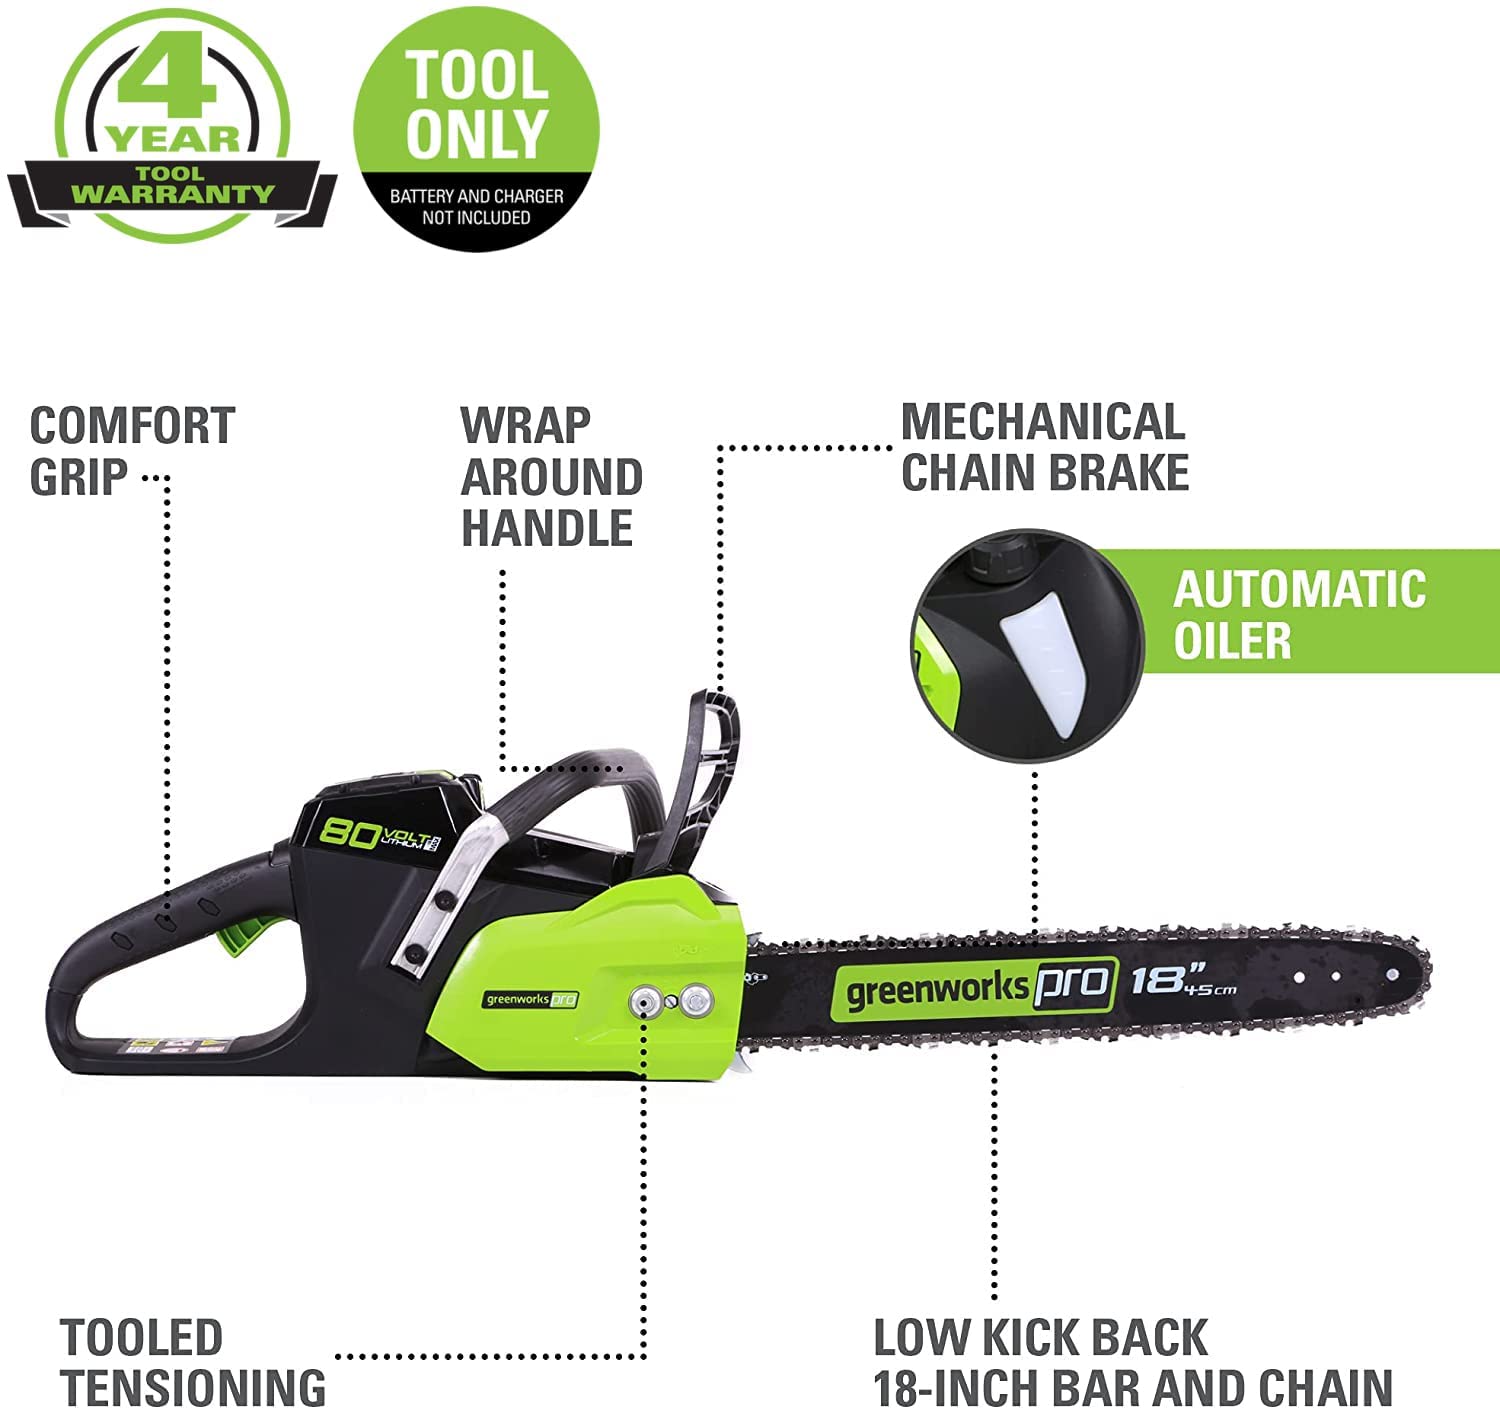 Pro 80V 18" Brushless Chainsaw (Tool Only)